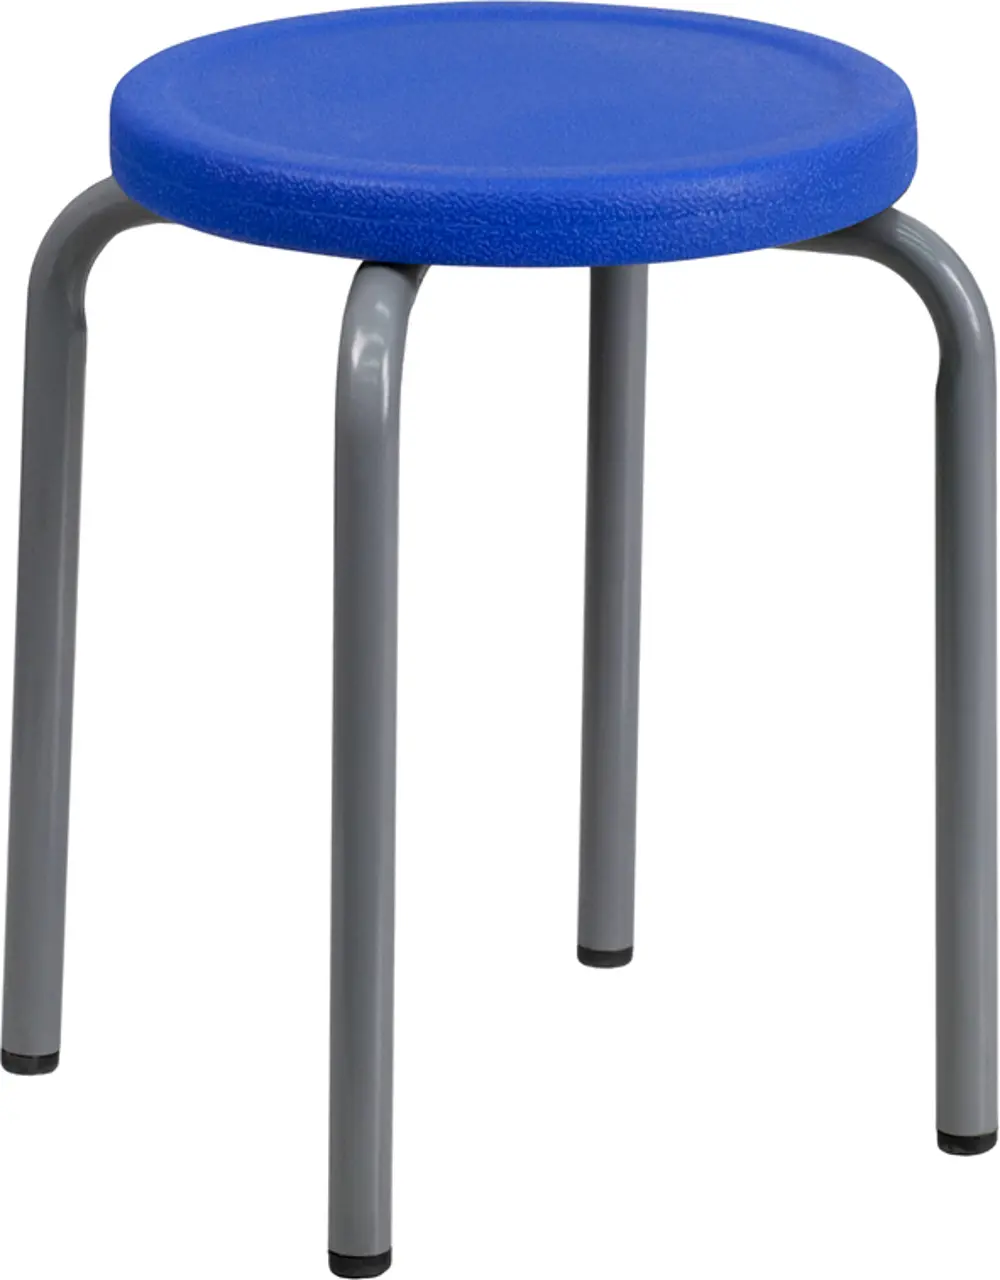 Heavy Duty Blue Plastic Seat Stacking Stool-1